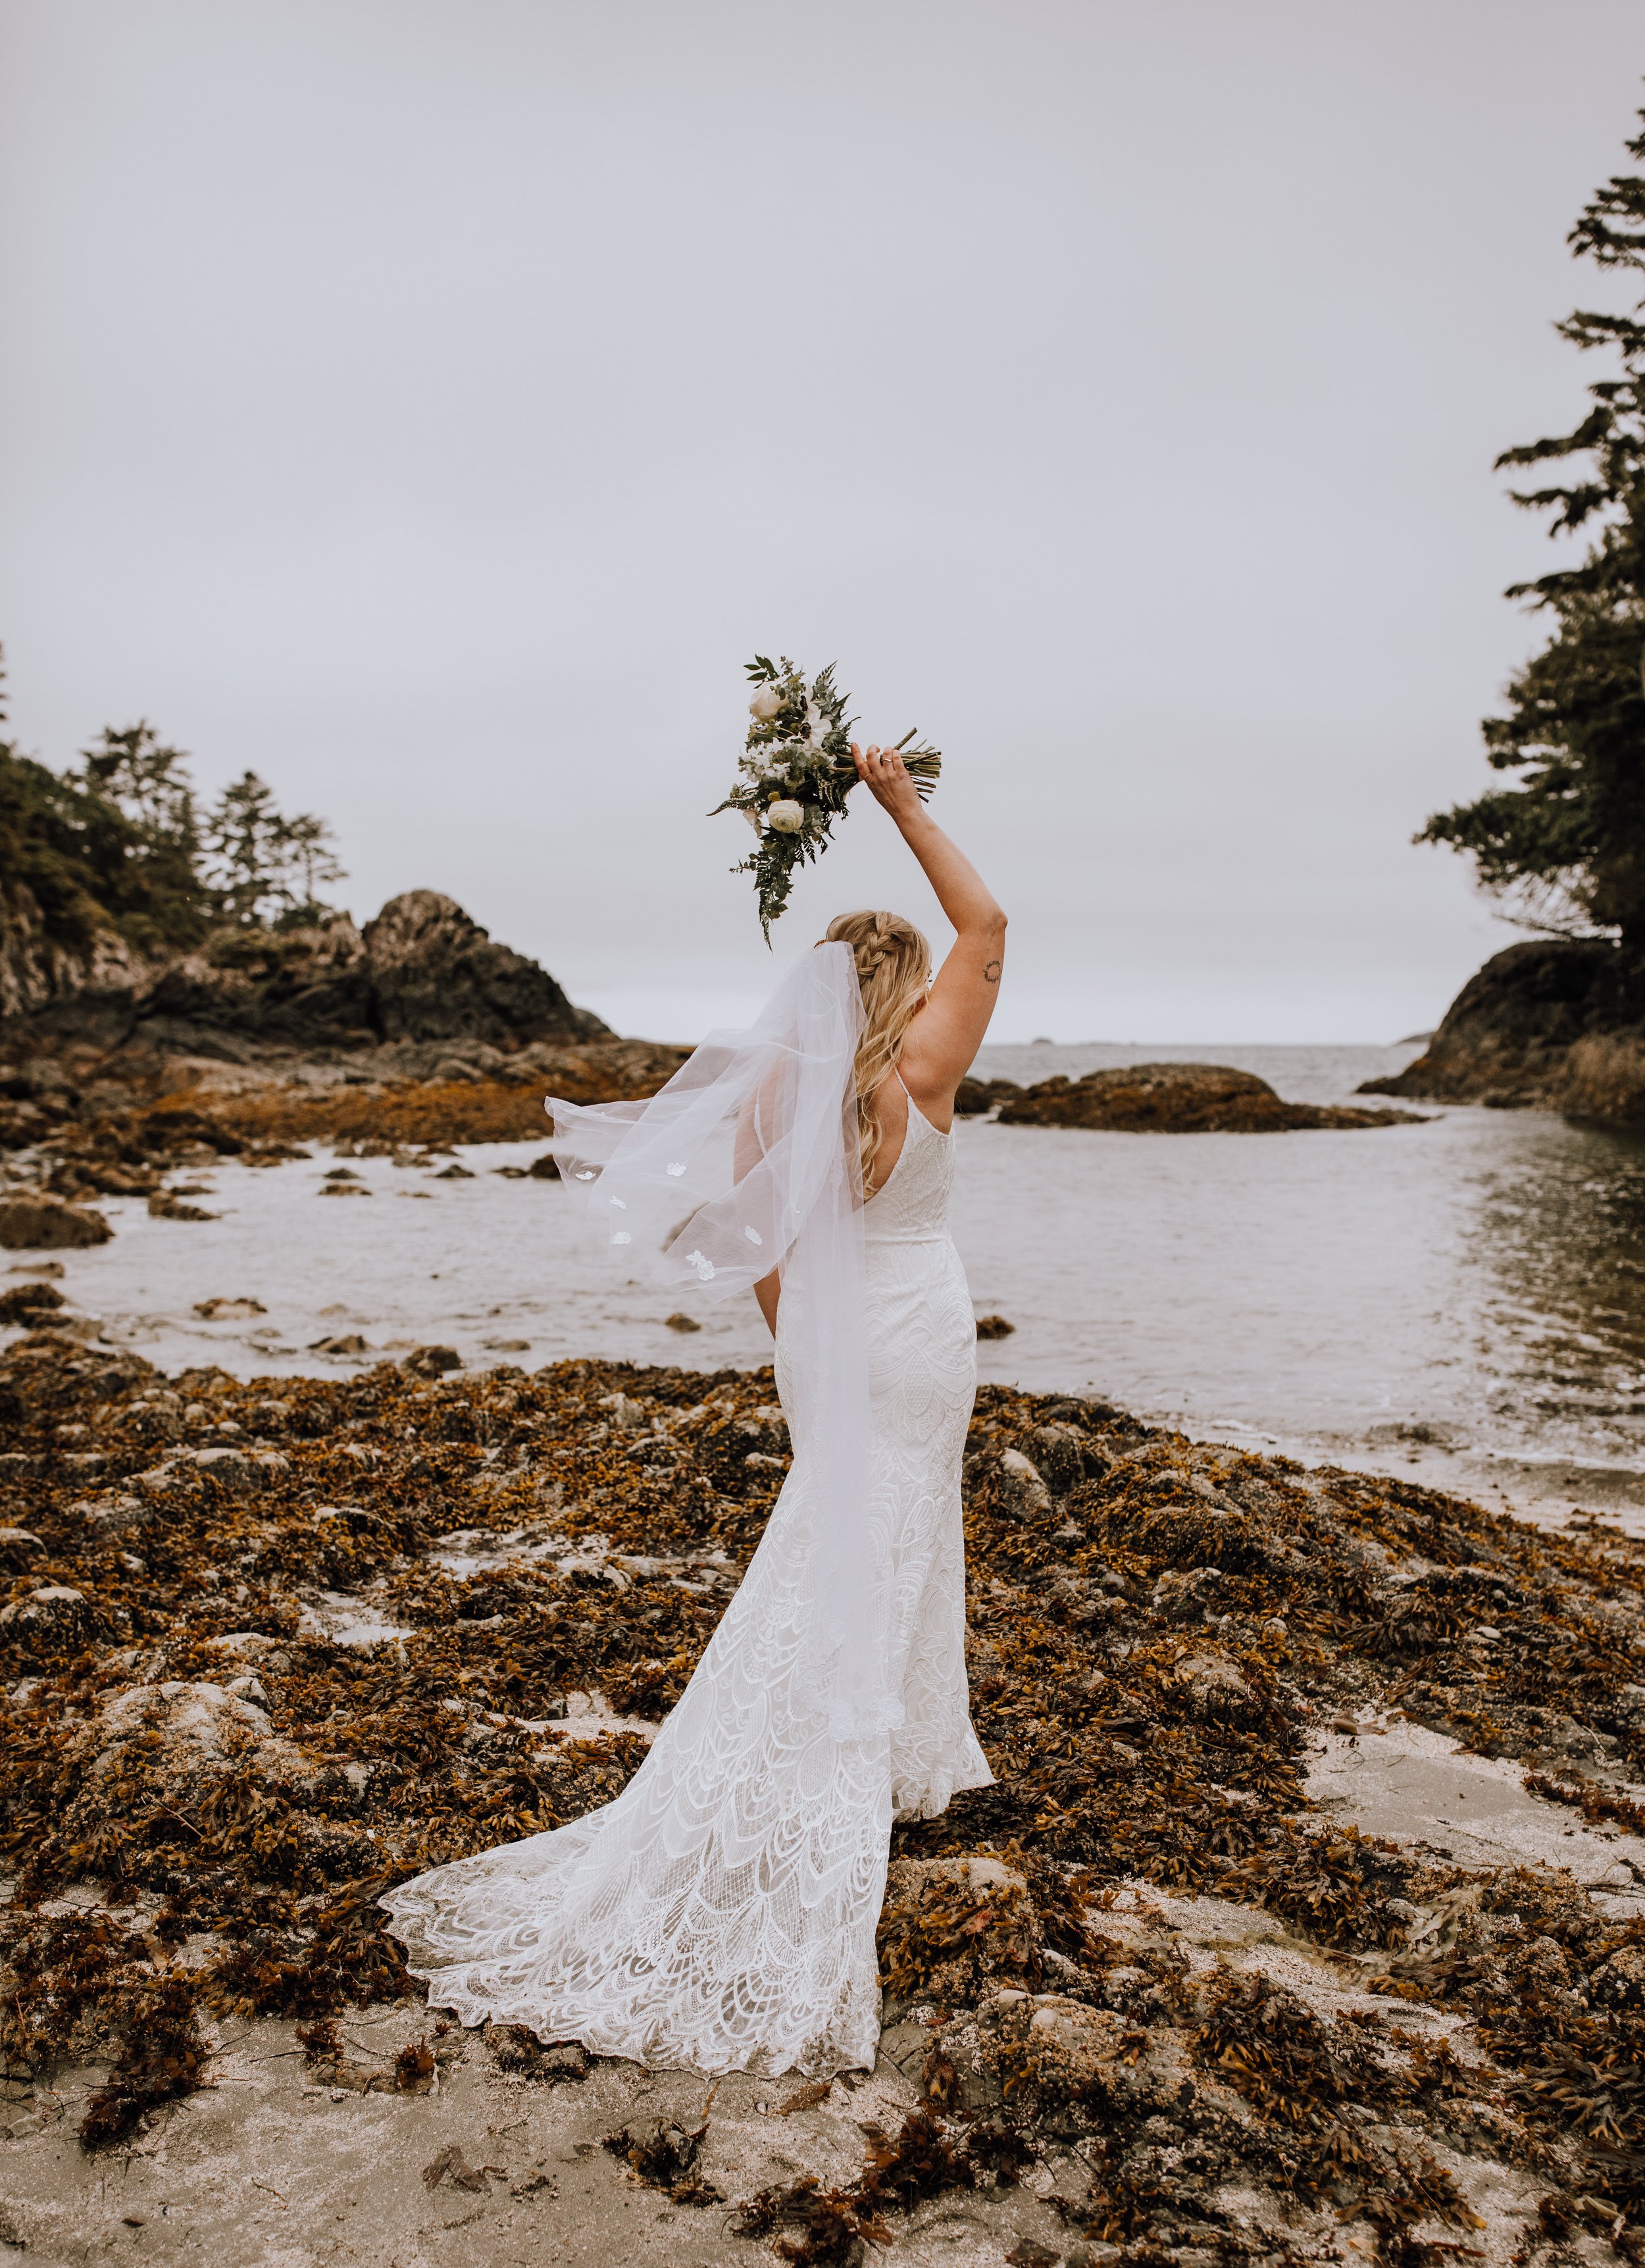 Brooke and Devin Wedding - Tin Wis Best Western Tofino Vancouver Island British Columbia - Elyse Anna Photography-4024.jpg